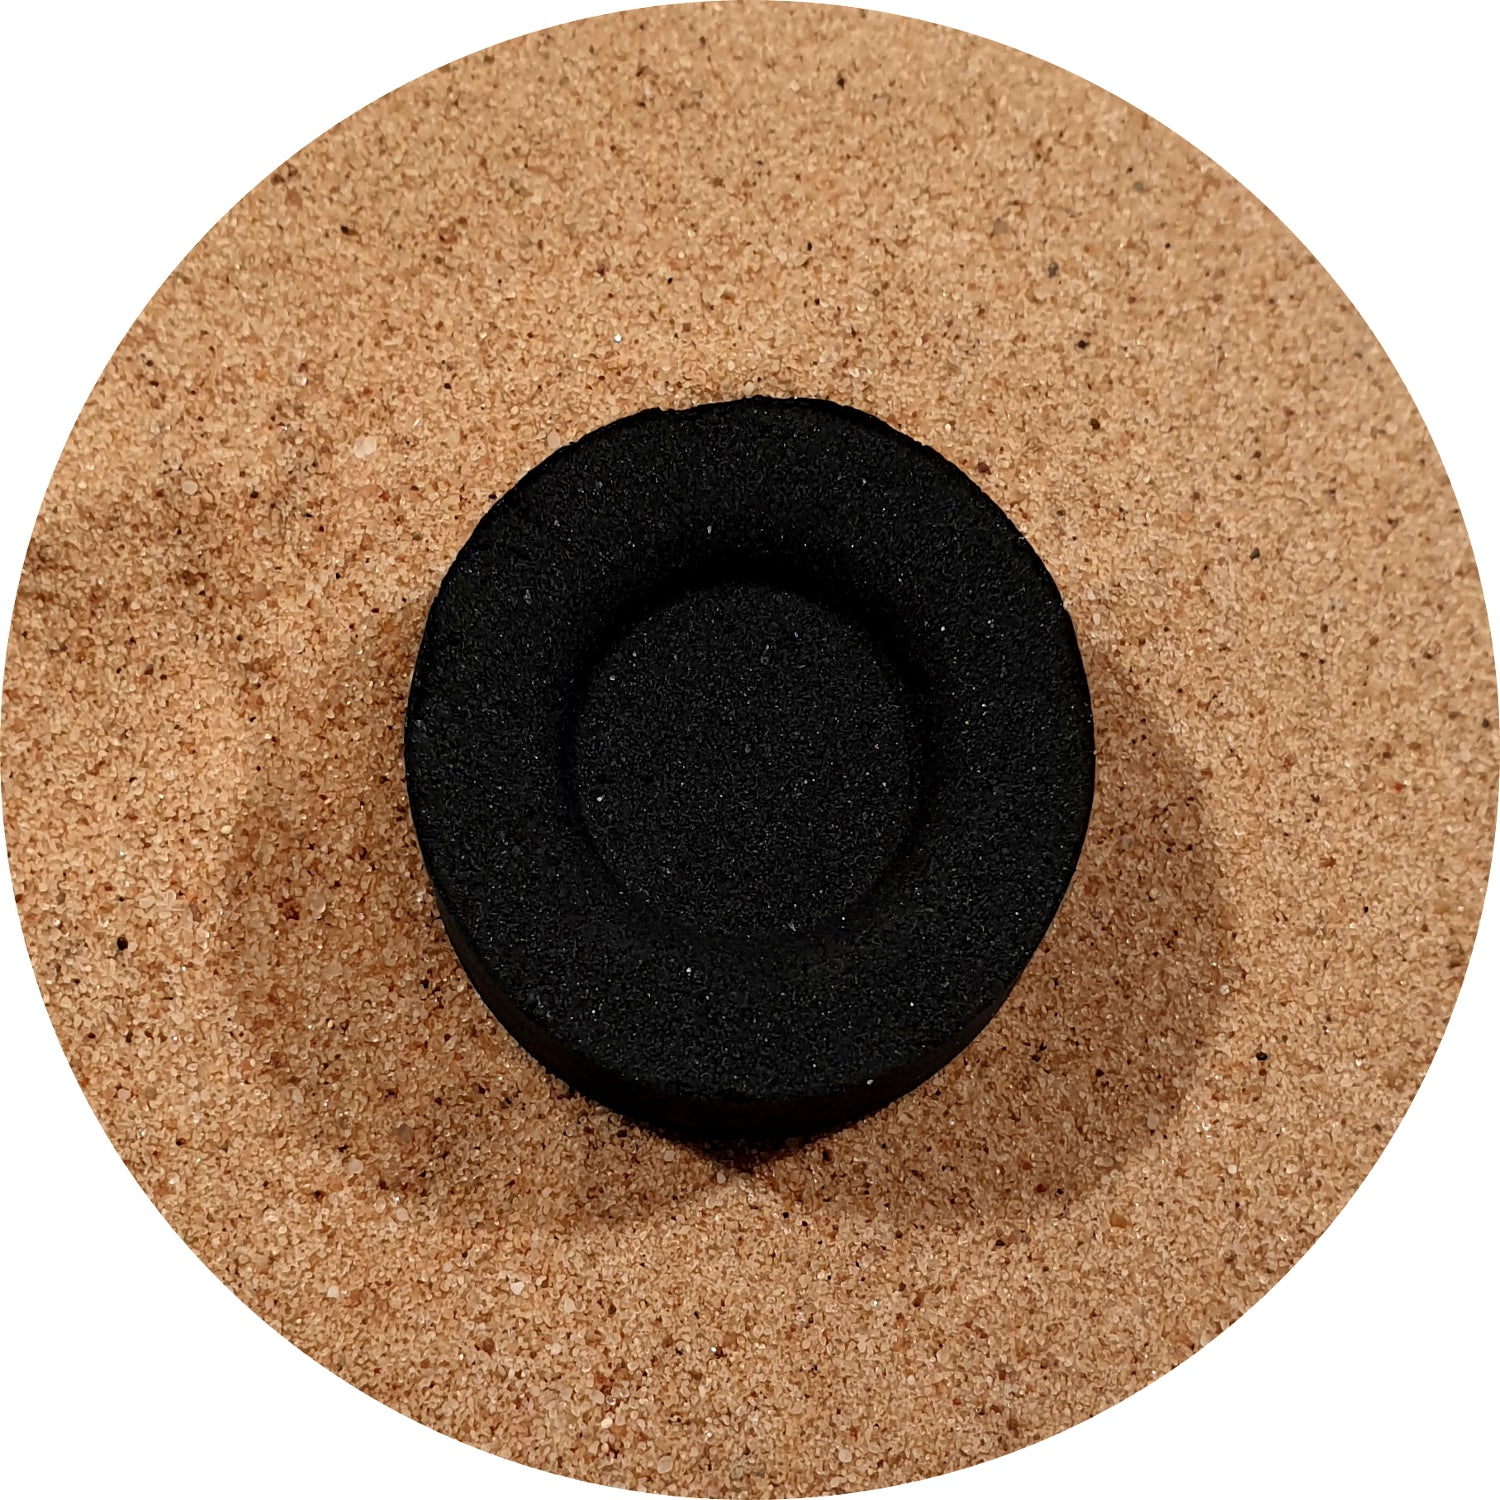 Charcoal Disc Roll of 10 discs, ideal for use with Magical Herbs, loose incense, smoke smudging.